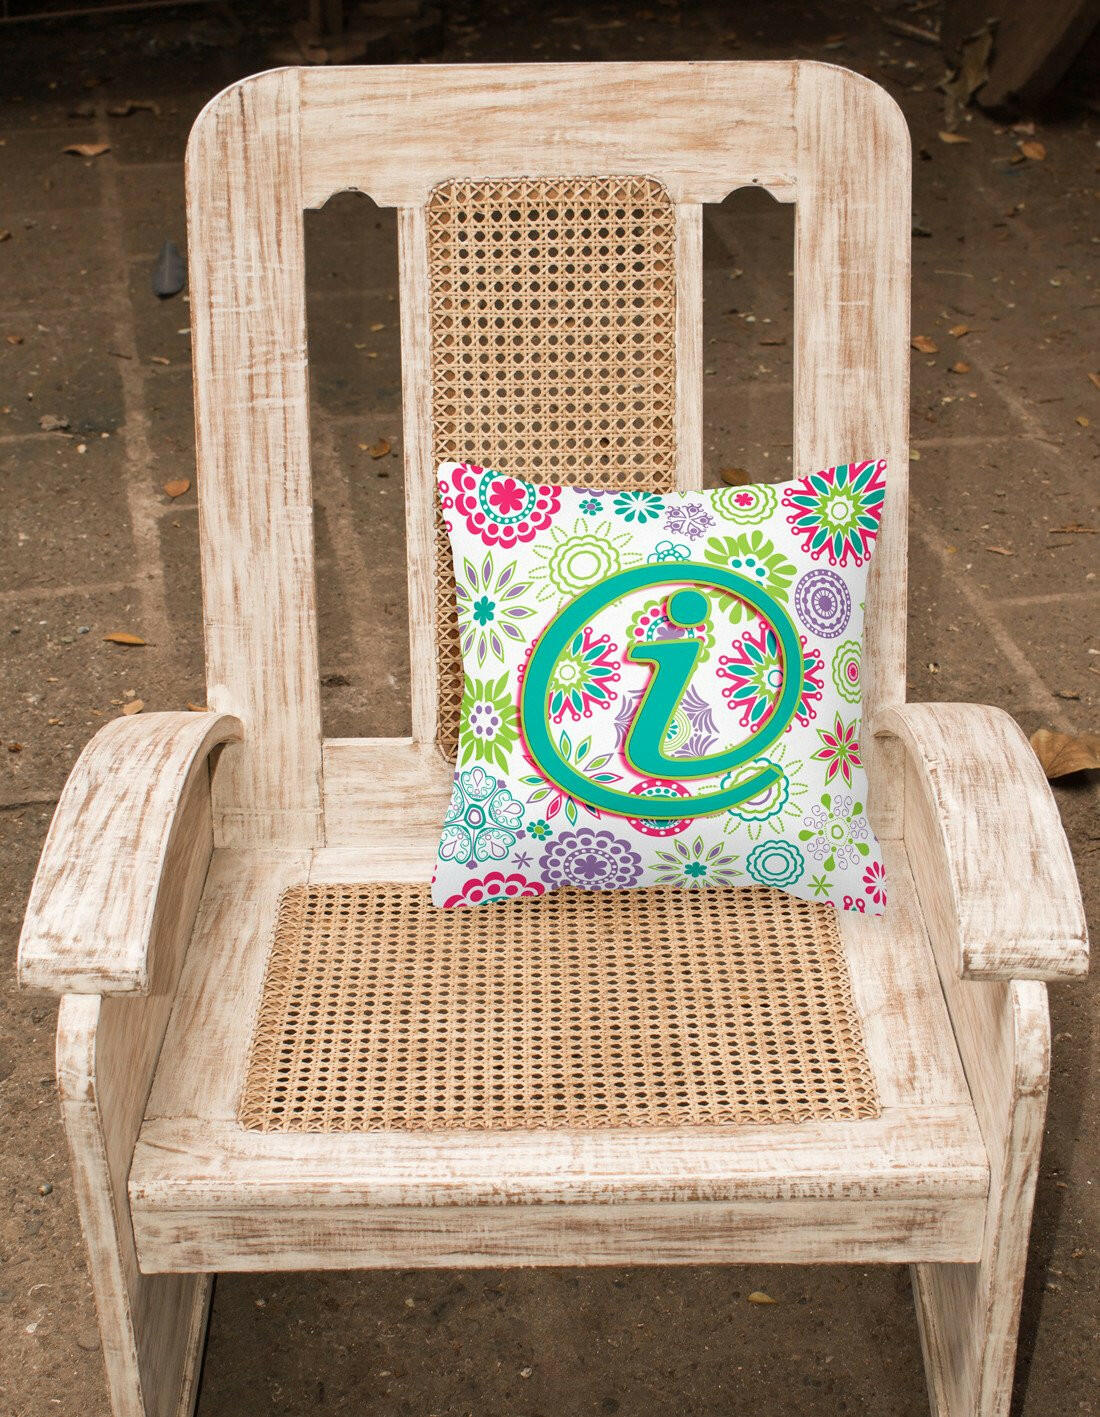 Letter I Flowers Pink Teal Green Initial Canvas Fabric Decorative Pillow CJ2011-IPW1414 by Caroline's Treasures